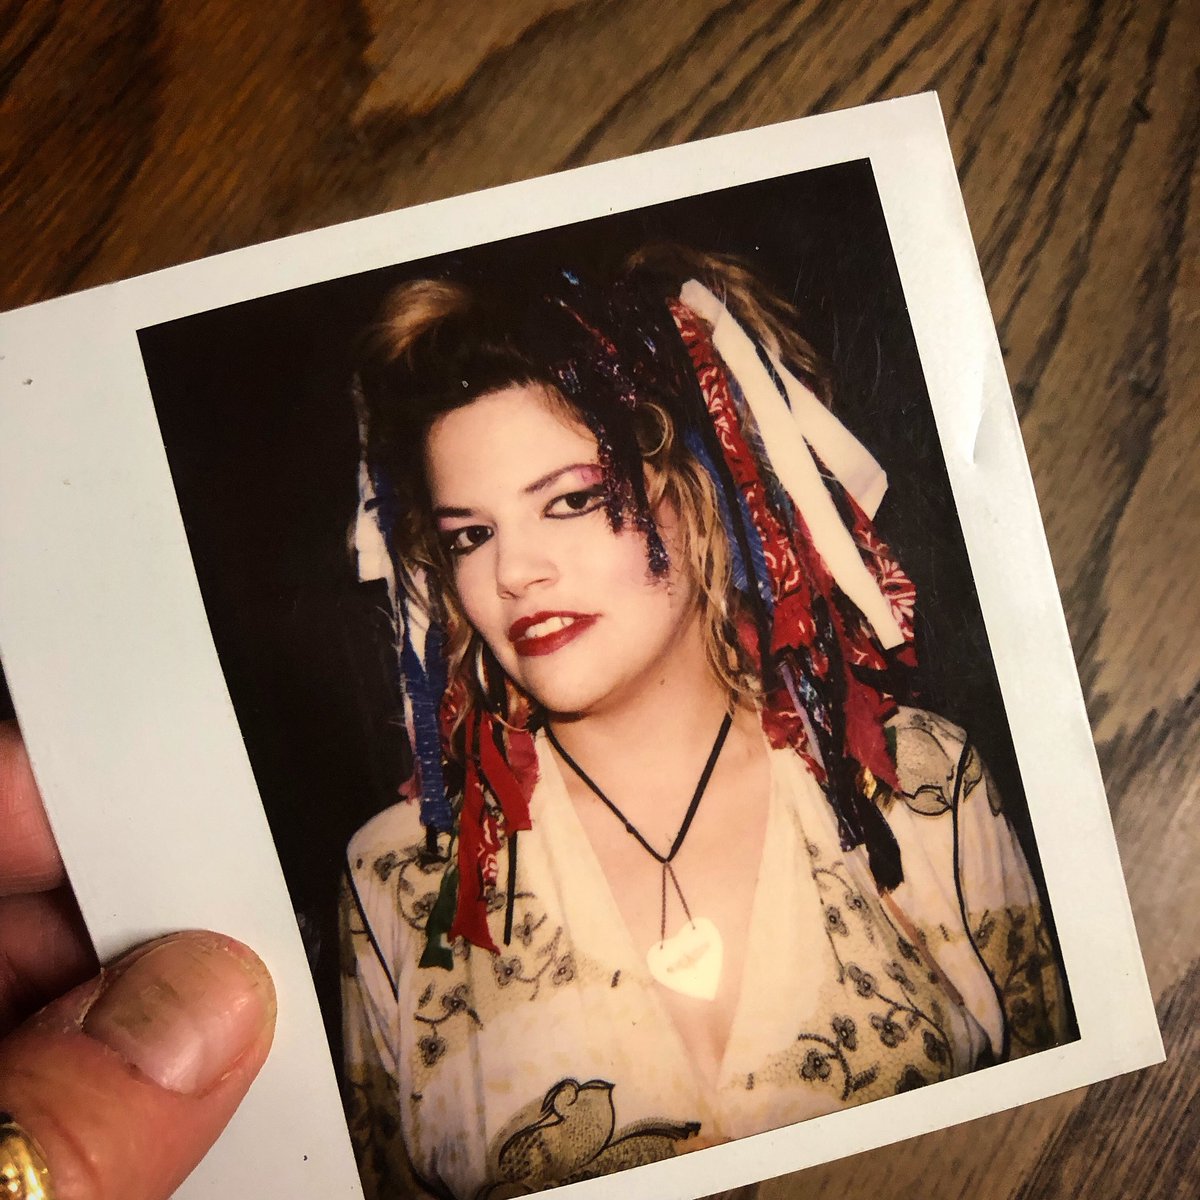 #tbt circa 1992 Backstage at The Roxy at a Ringling Sisters show. My fashion statement at the time was floor length floral rayon 1940’s dressing gowns & tying rags into my hair. 🙌🏼 Not sure who took this pic. #polaroidphoto #90s